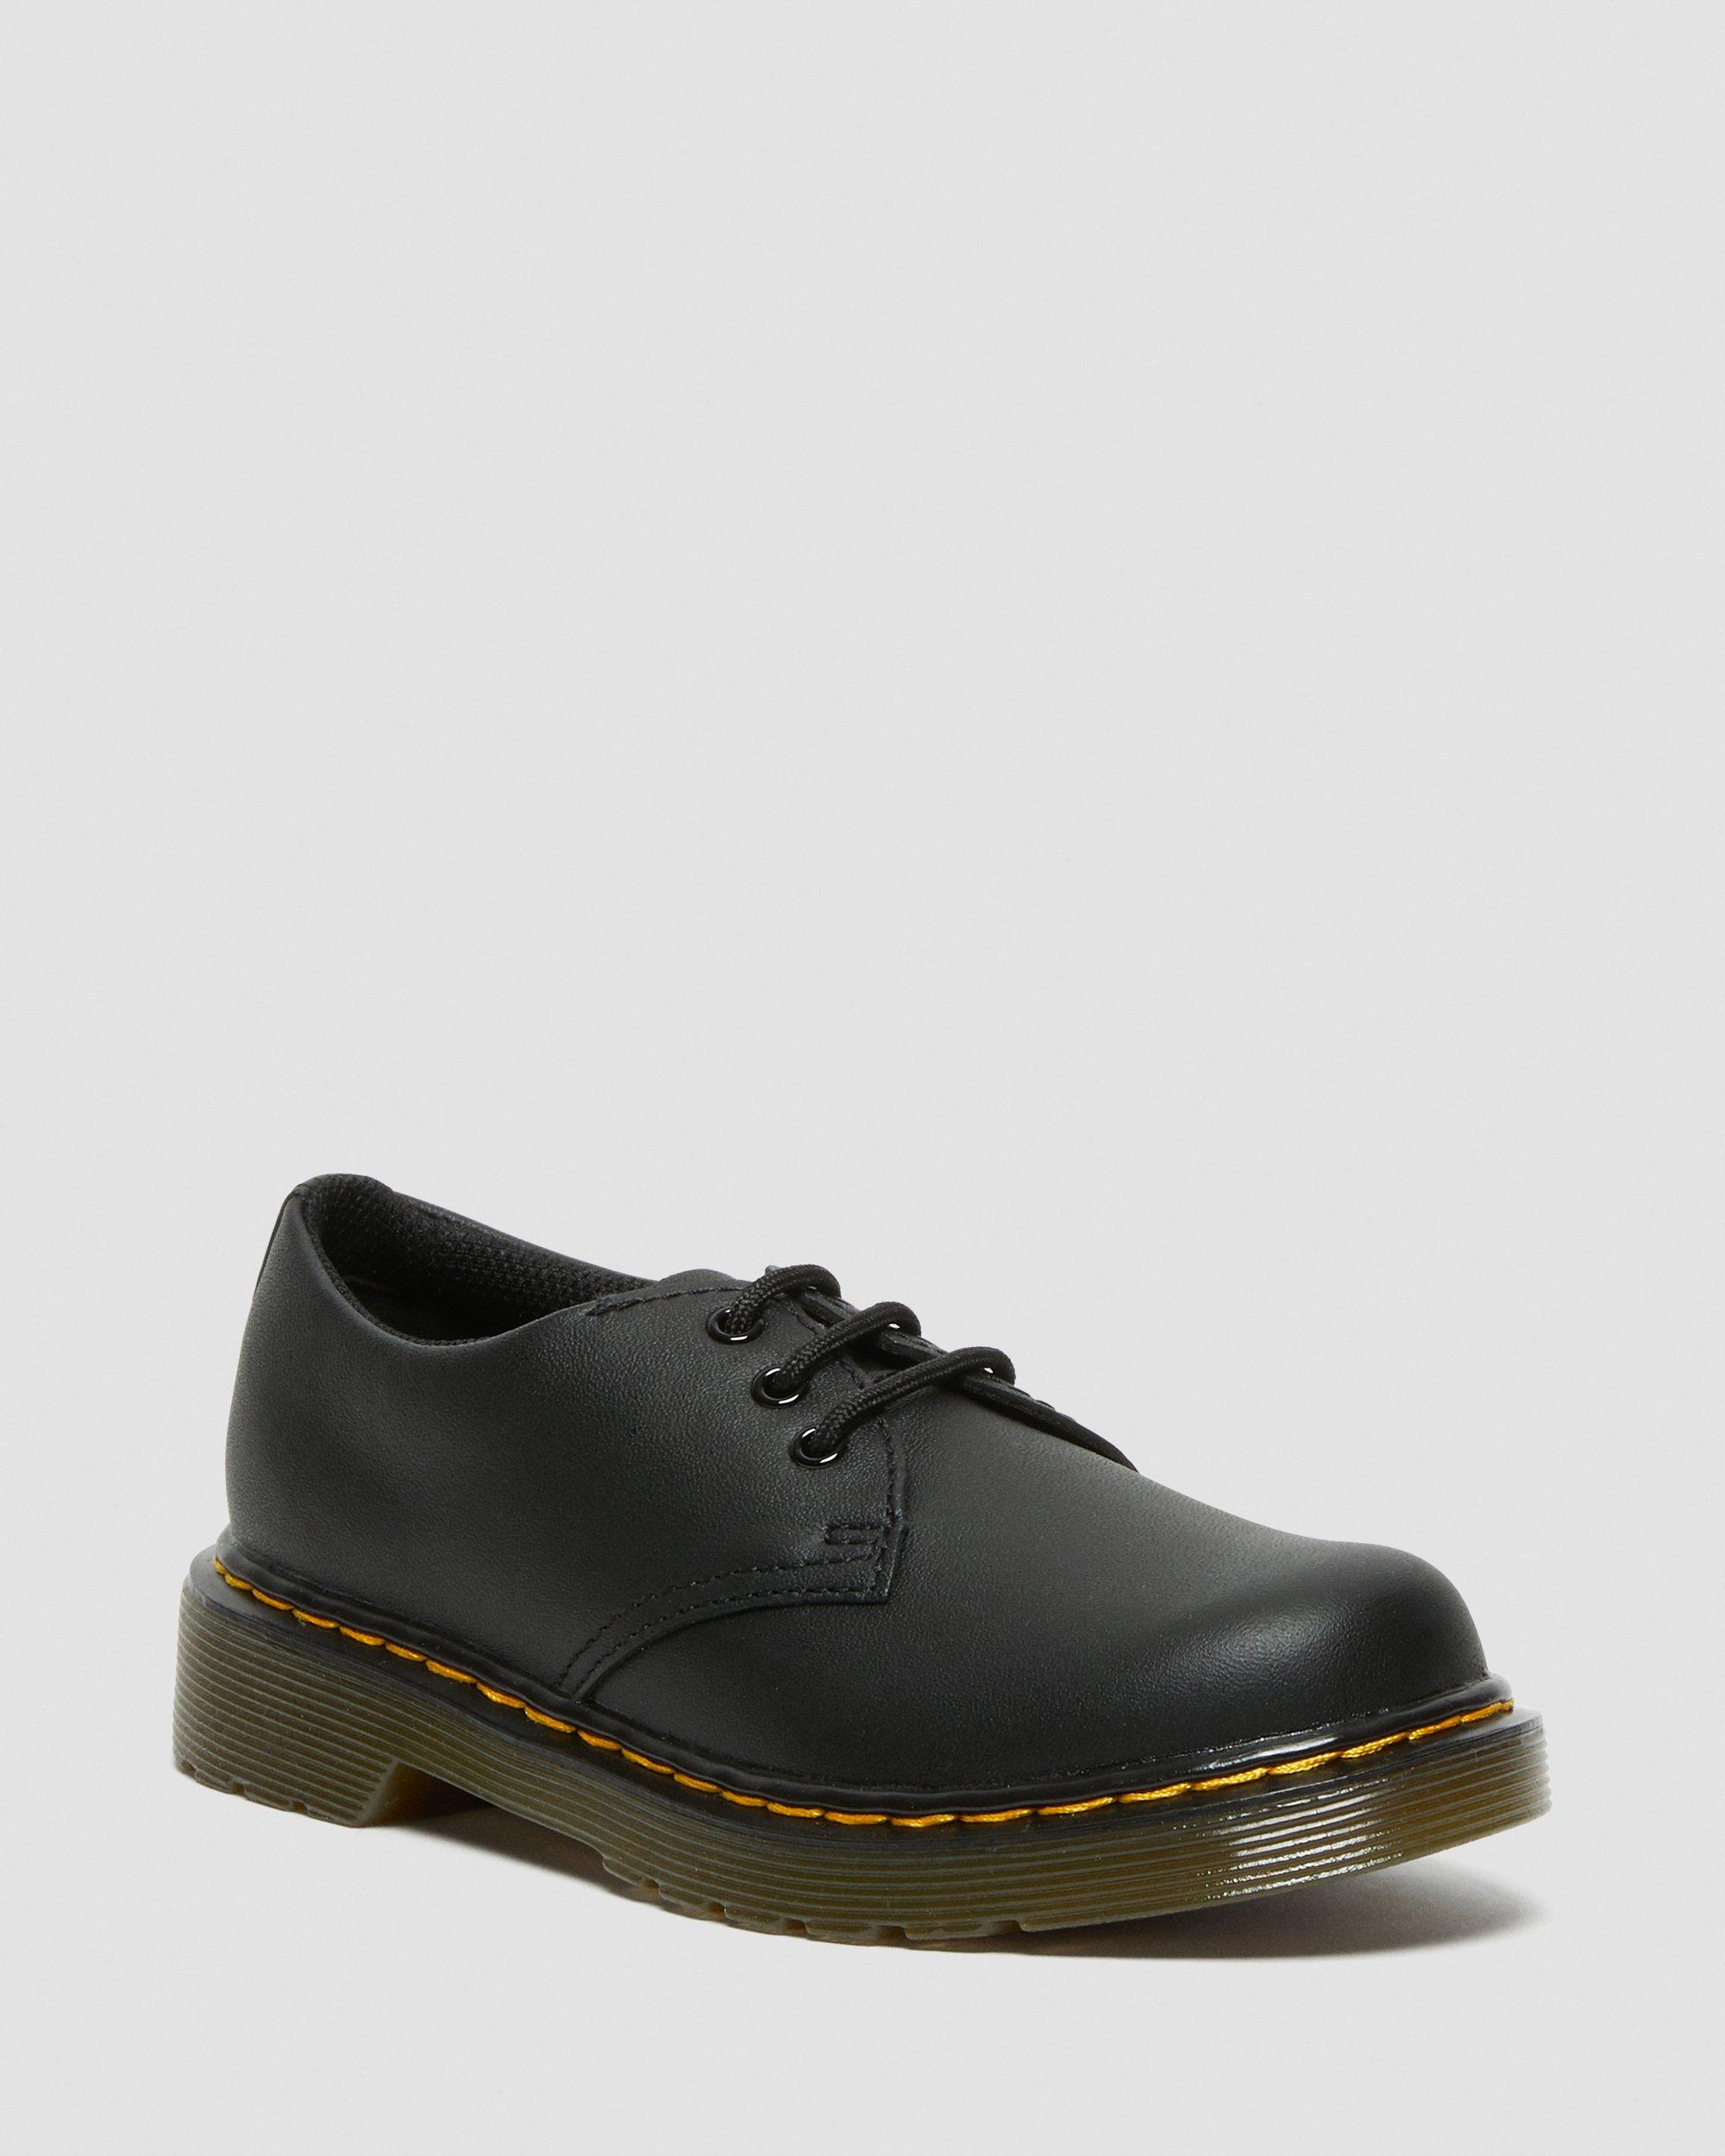 JUNIOR 1461 SOFTY T LEATHER SHOES | Dr. Martens